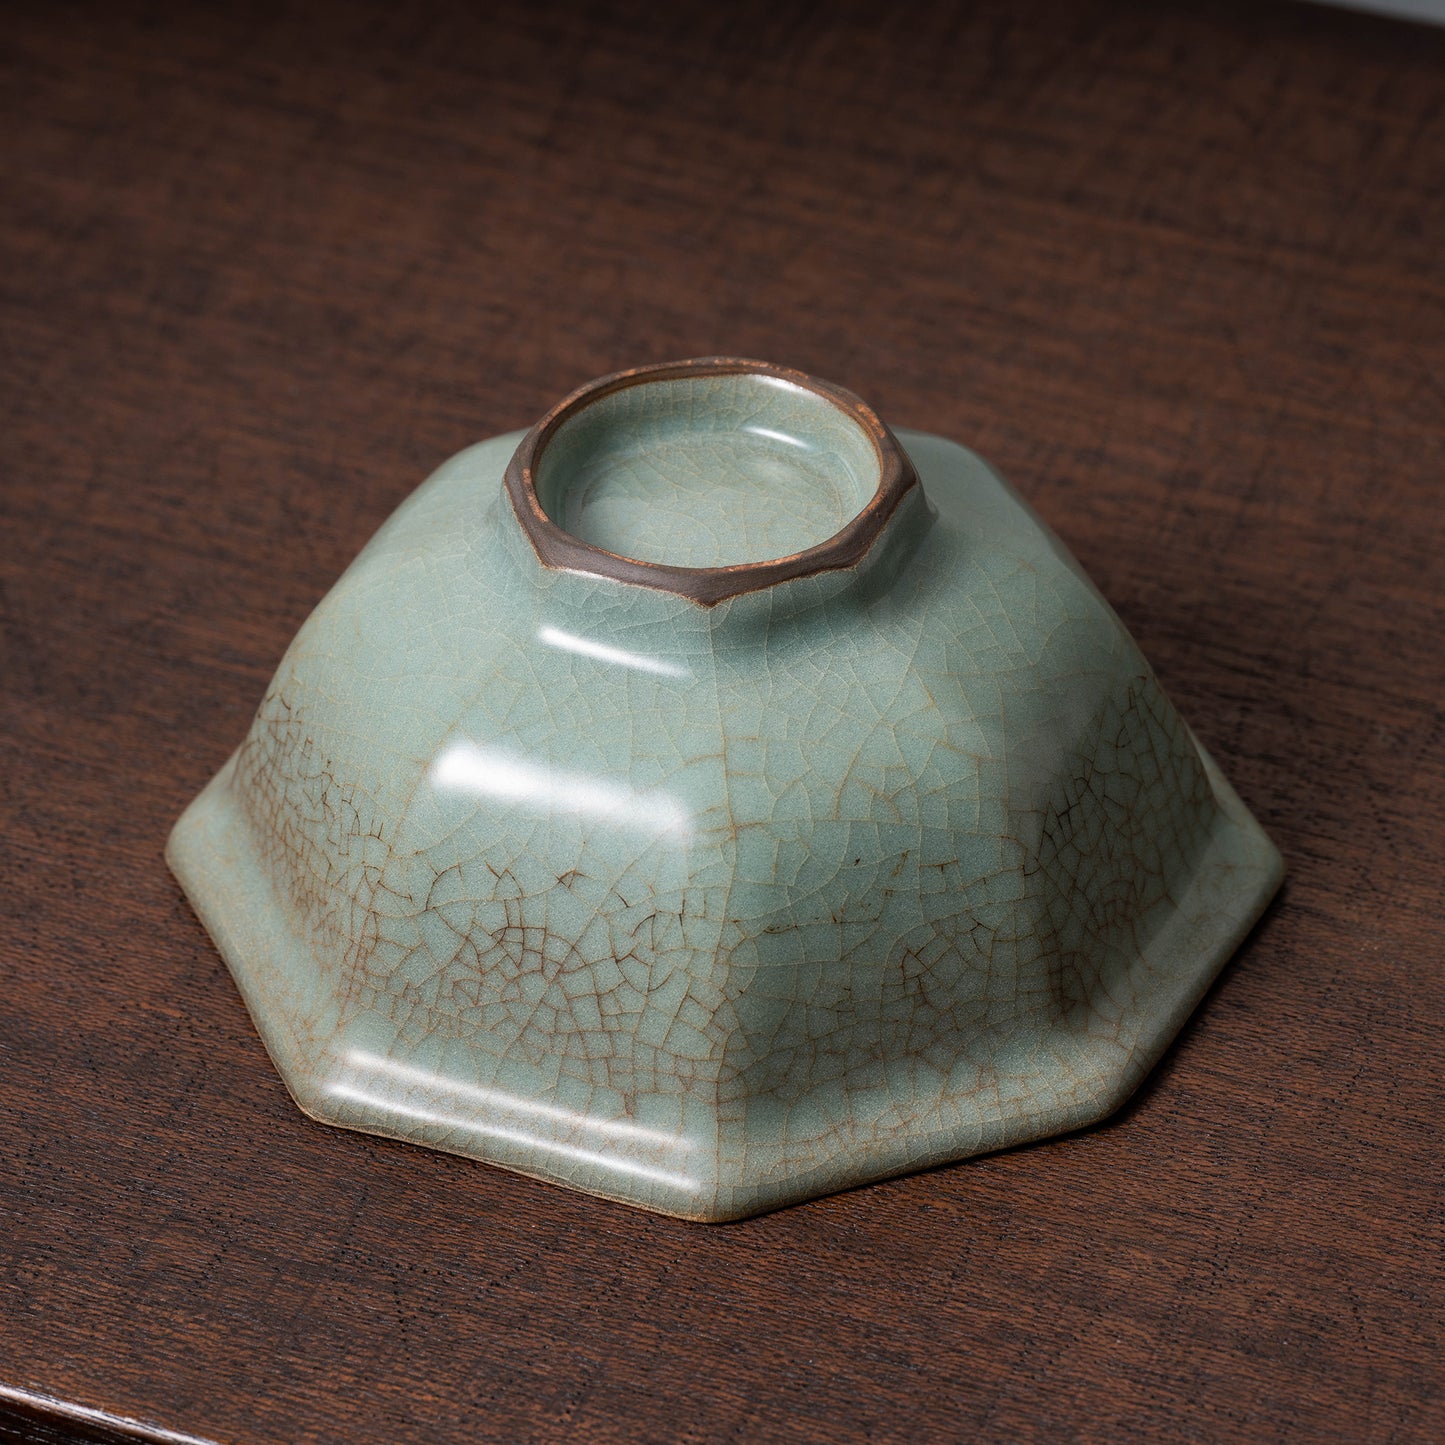 Yuan Dynasty Guan ware Celadon Teabowl with Pasted Tortoise Design